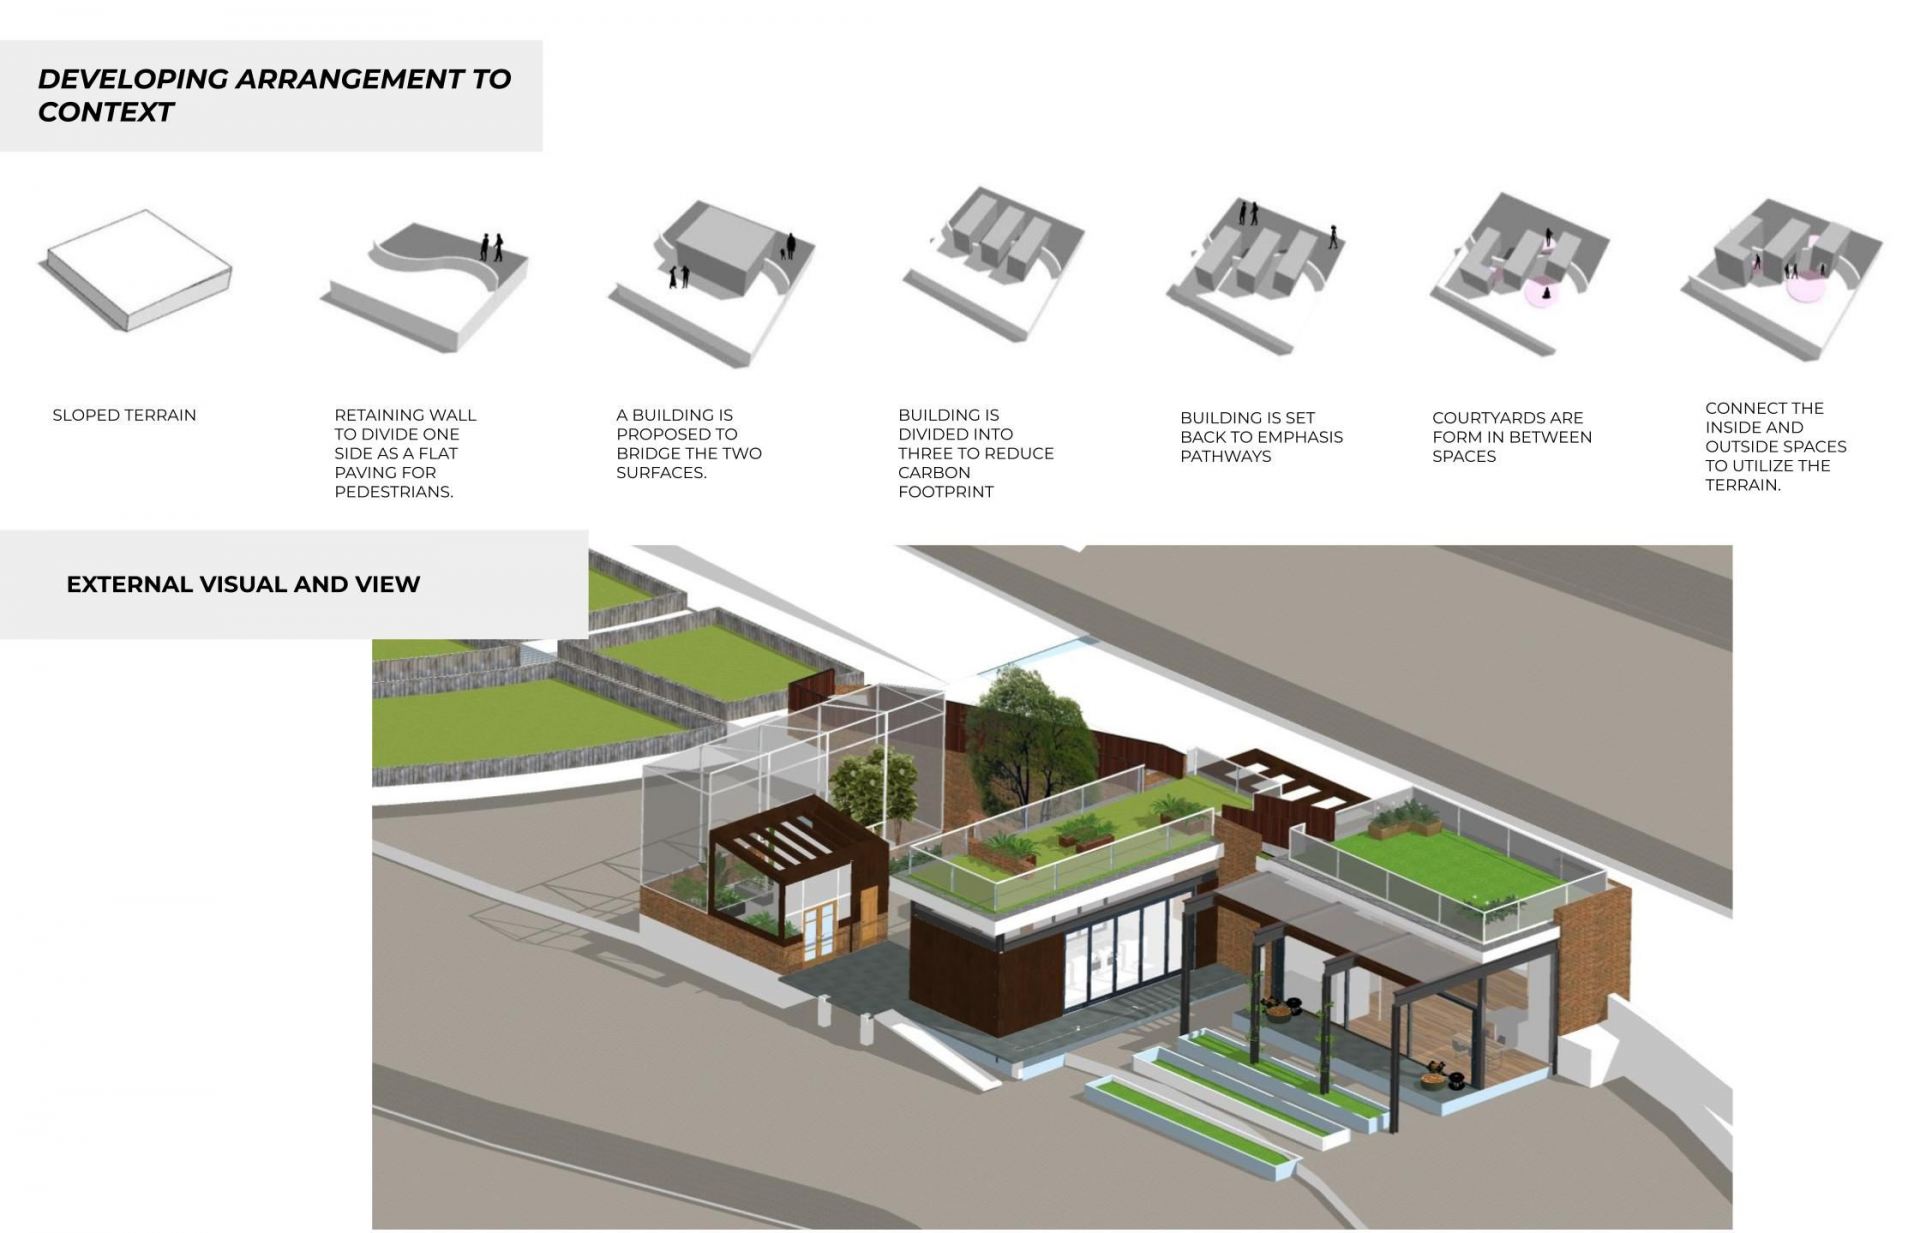 Development of proposed building